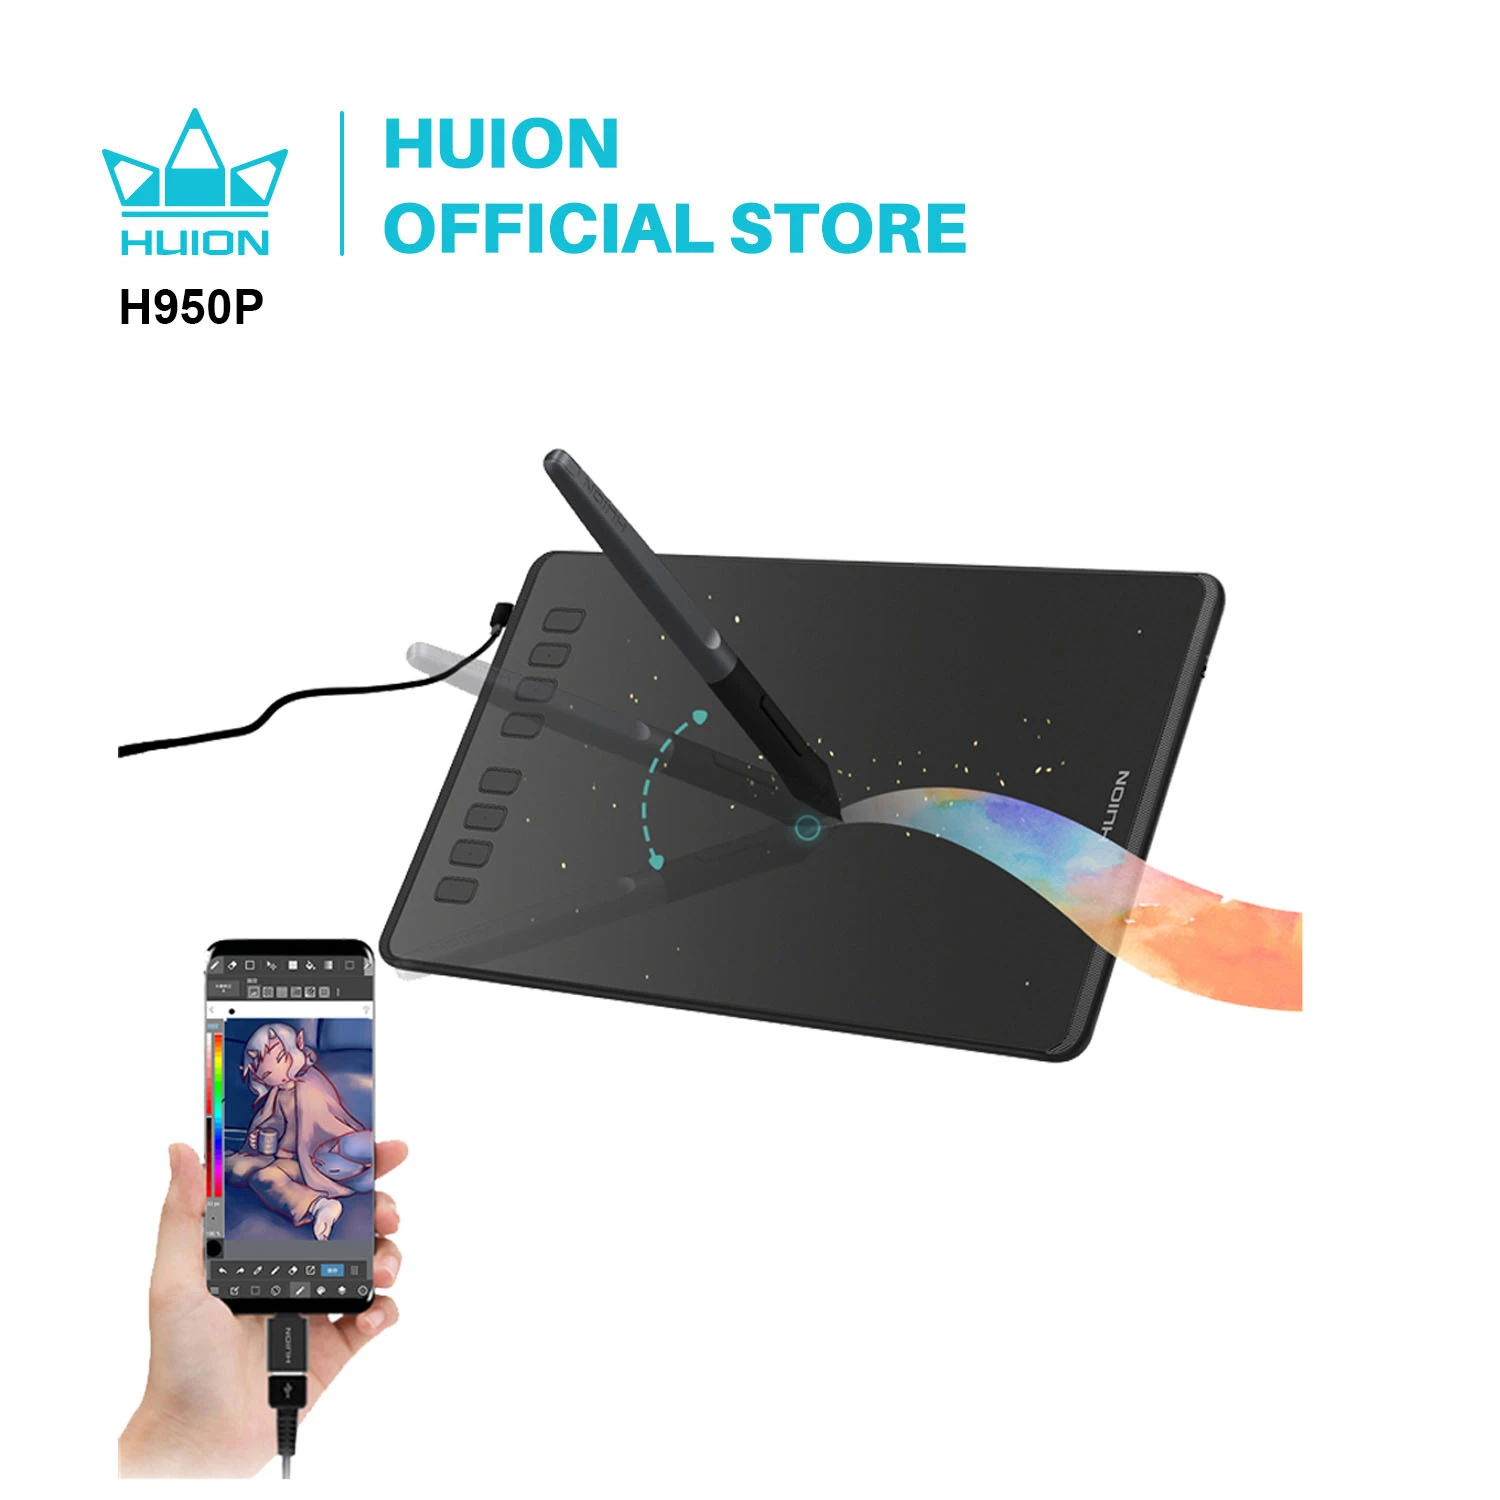 HUION Ultralight Graphic Tablets H640P/H950P Digital Tablet Drawing Pen Tablet With Battery-Free Stylus for pc and android phone